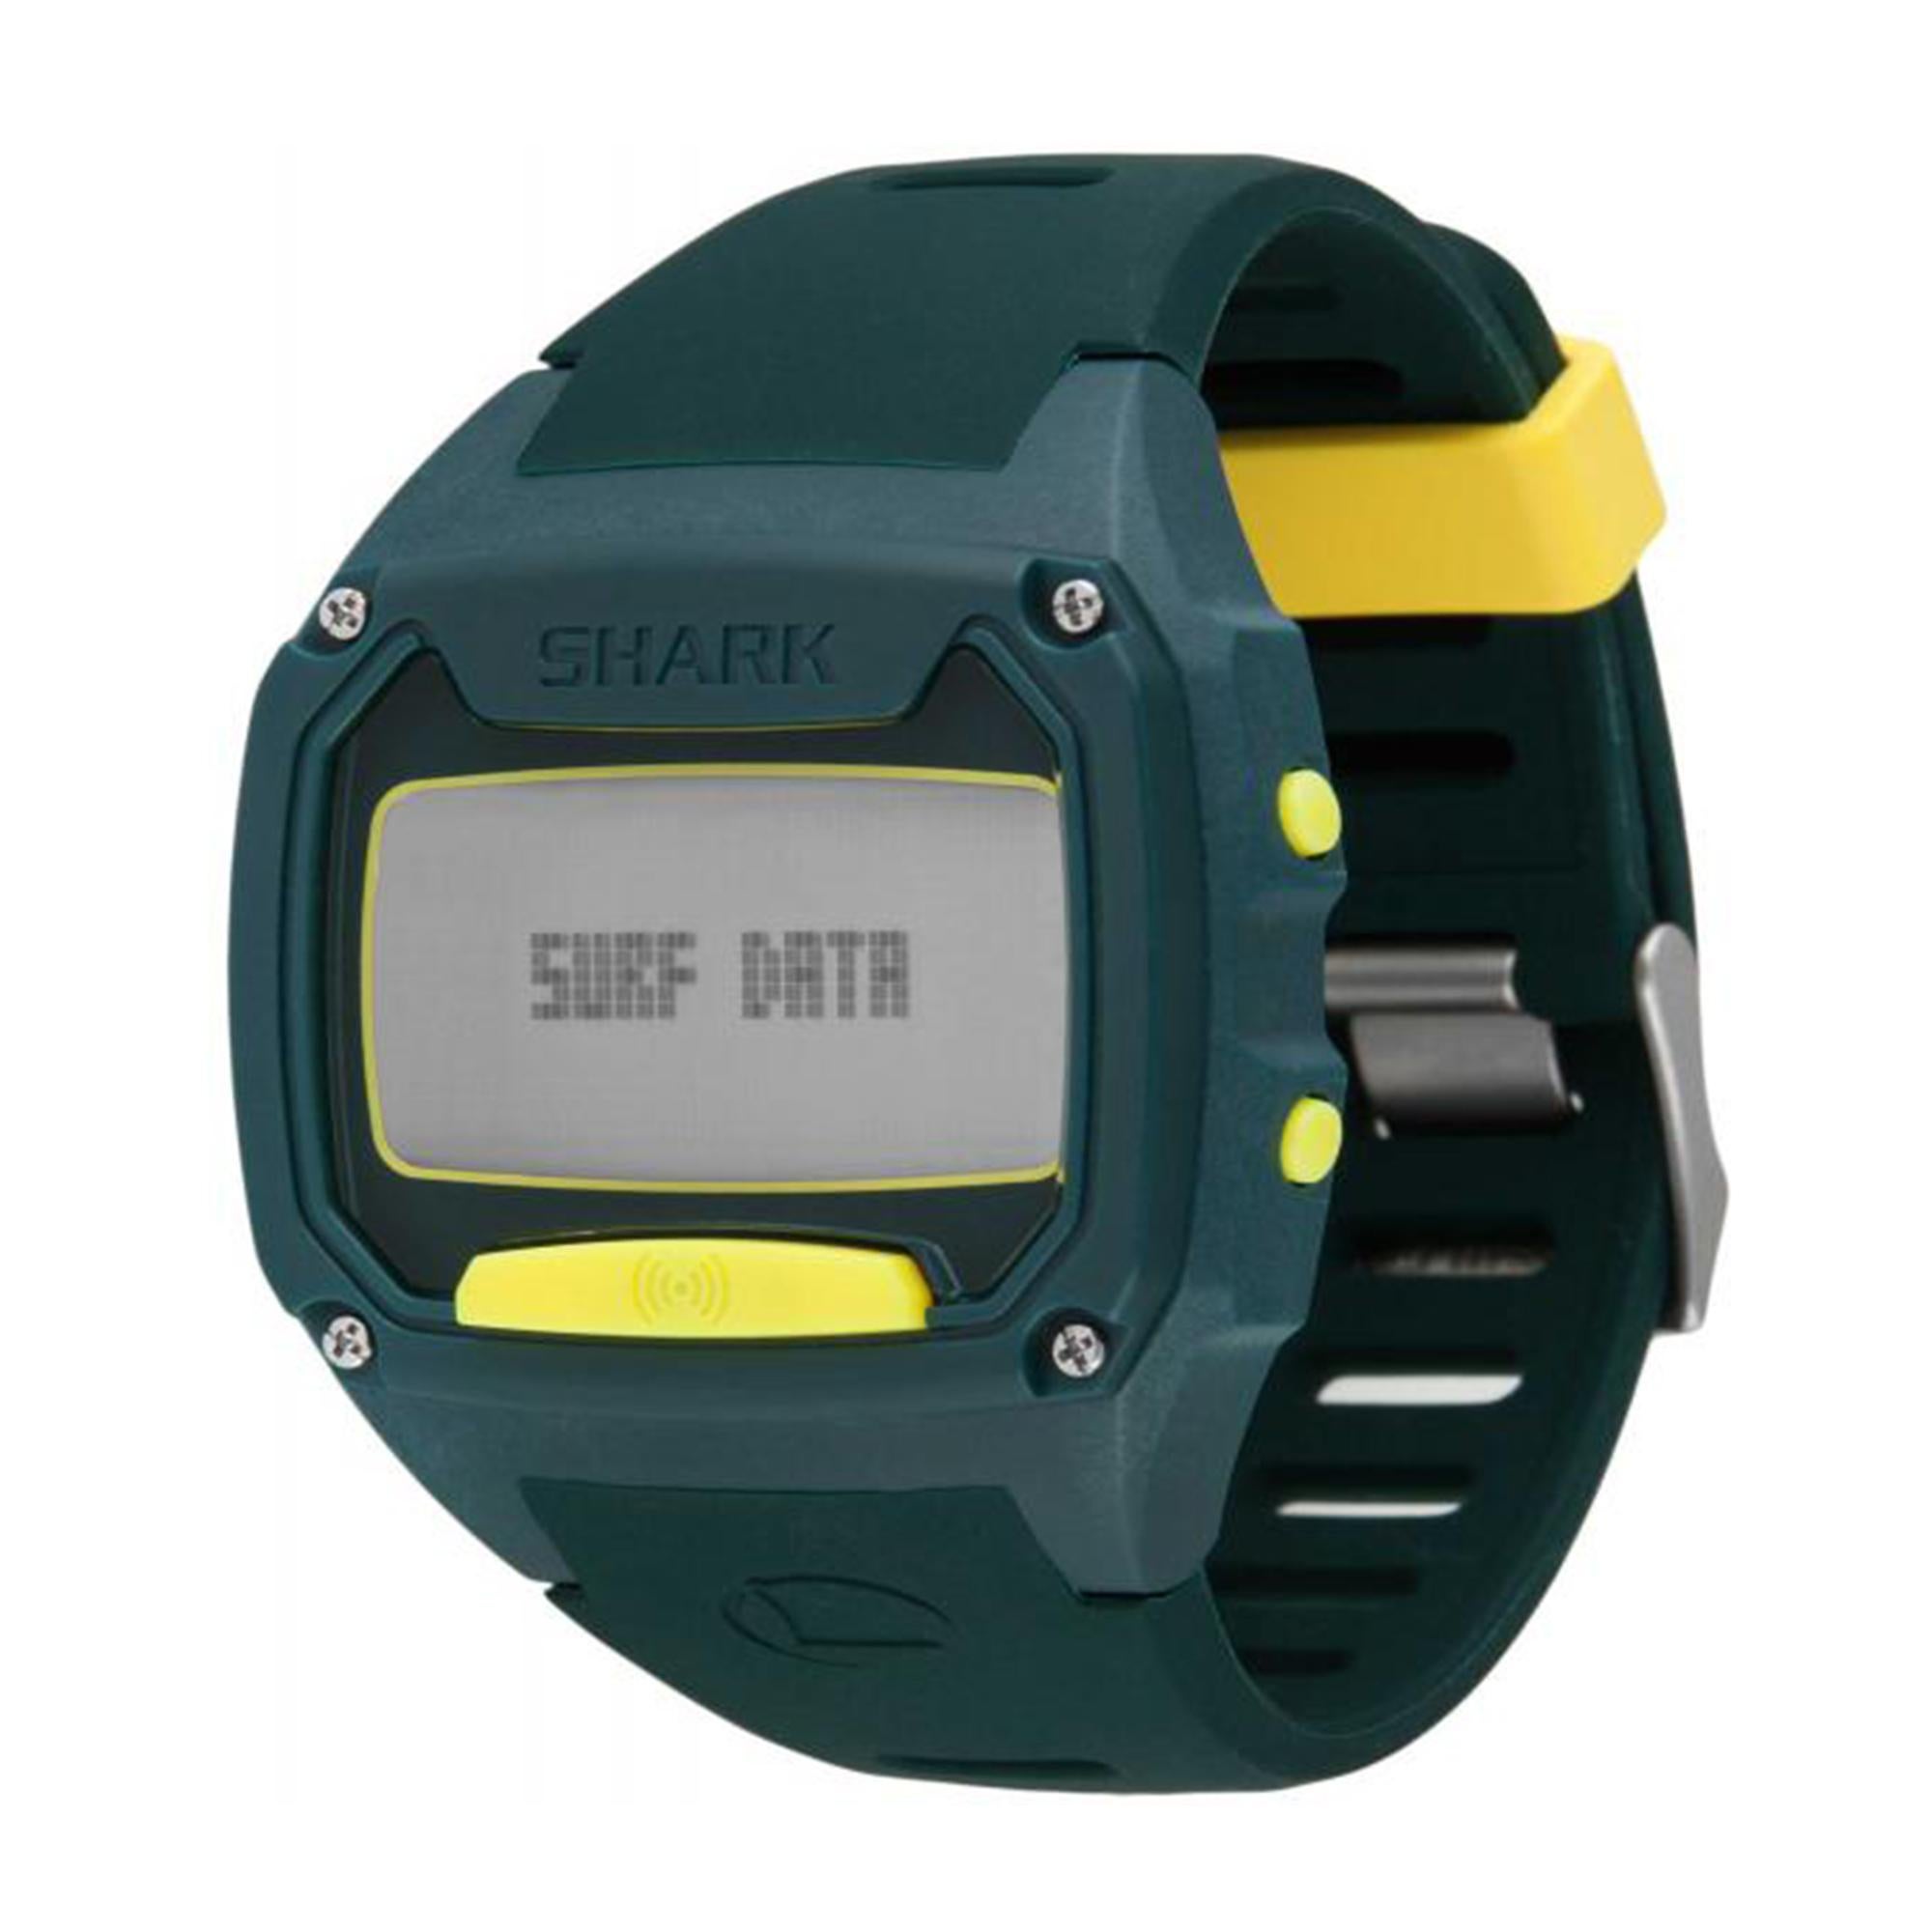 The Shark Tooth tide watch from Freestyle is their first Bluetooth enabled watch with surf and weather data powered by Wavetrak (the data behind Surfline). Features Olive green plastic case and bracelet with yellow pushers.Bluetooth enabled. This